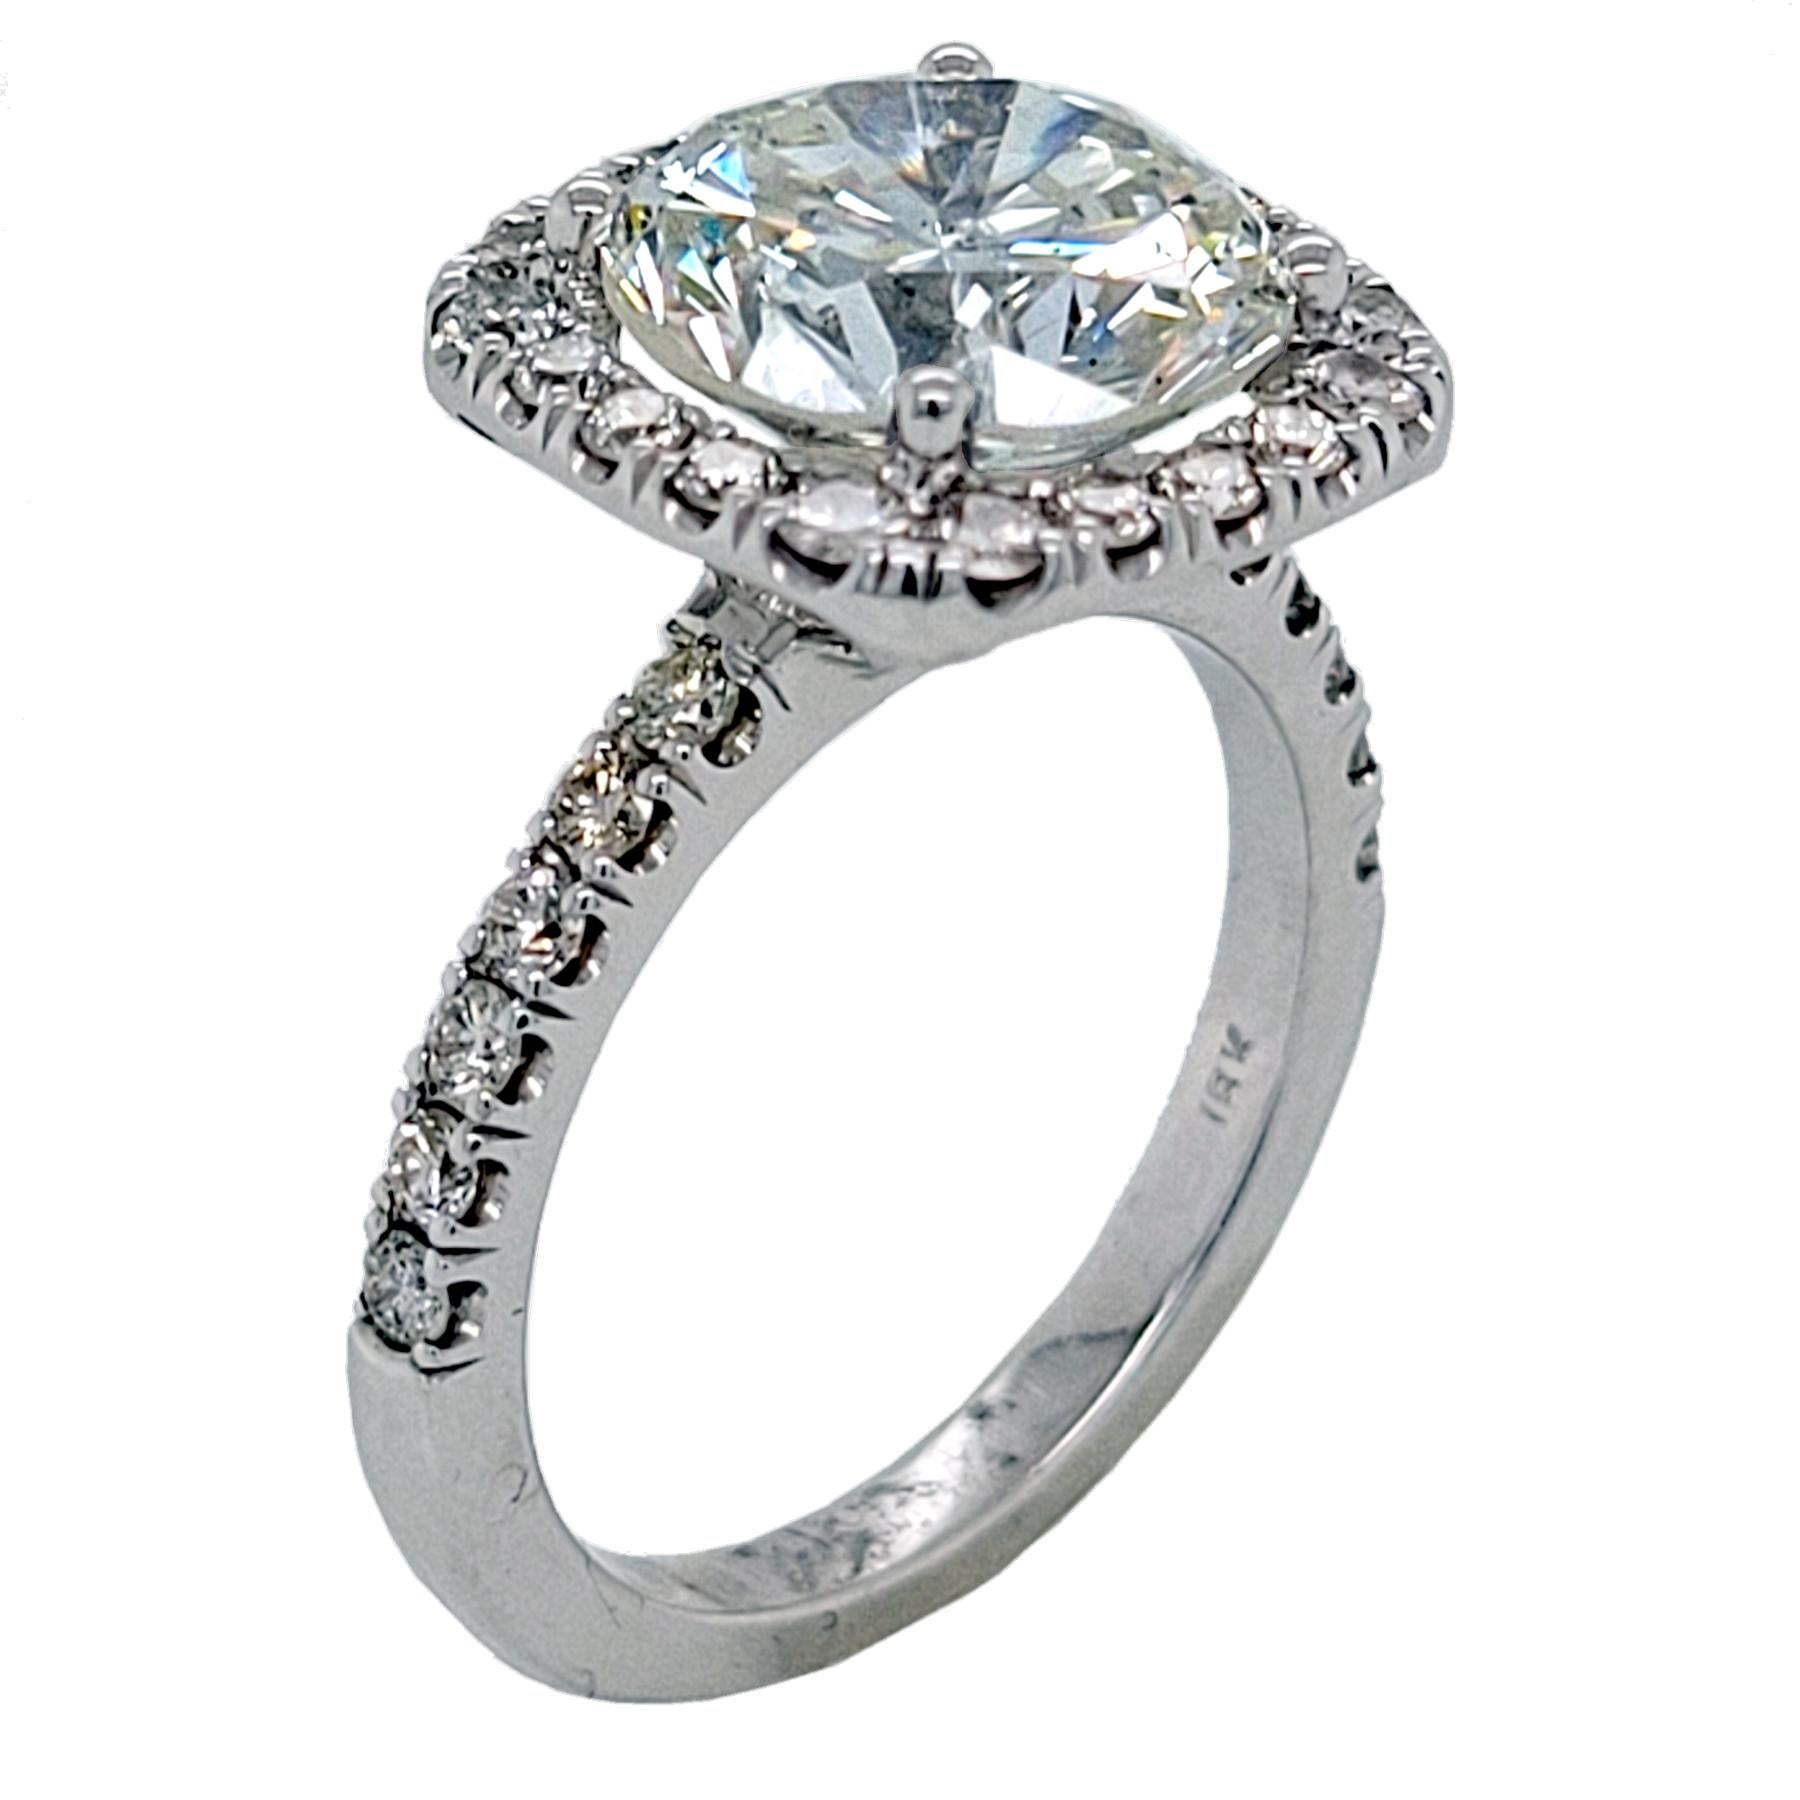 A very shiny 3.87 Ct Round Brilliant I/SI1 EGL US certified center Diamond set in a fine 18k gold Pave set Engagement Ring with a halo. Total diamond weight of 0.84 Ct. on the side. 

Diamond specs:
Center stone: 3.87 Ct EGL US Certified I/SI1 Round